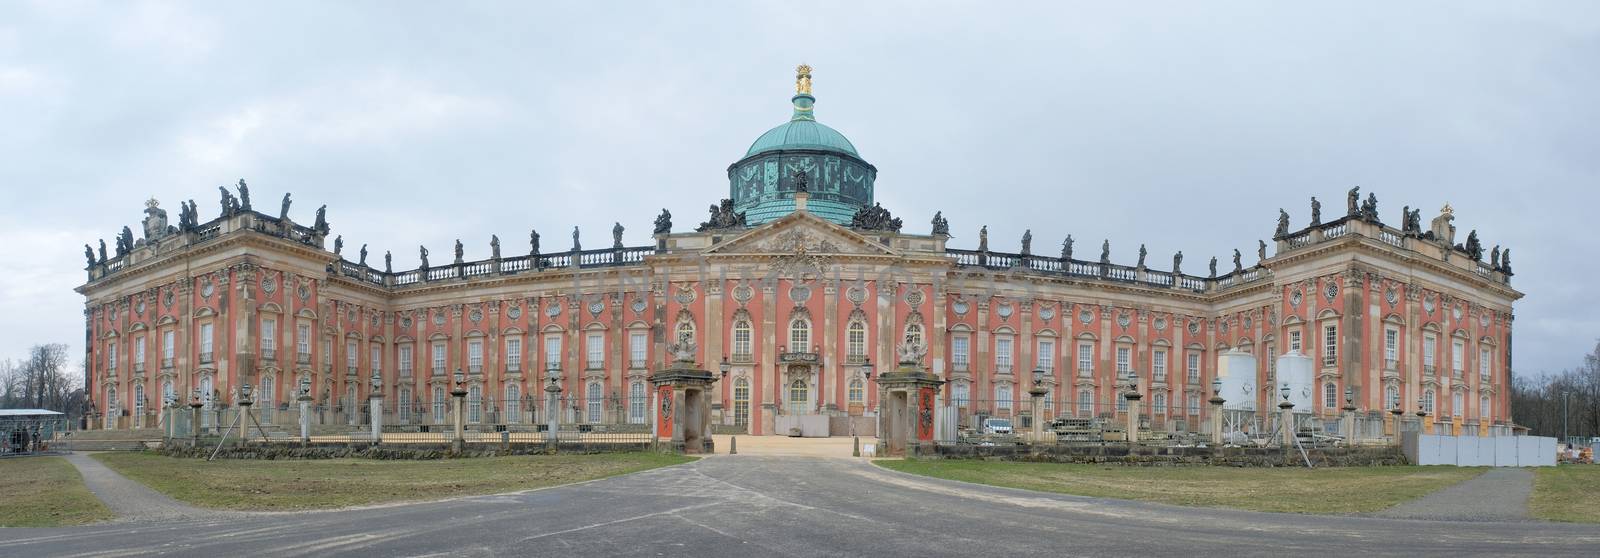 Panoramic view of Sans Souci palace in Potsdam, Berlin, Germany, Europe.